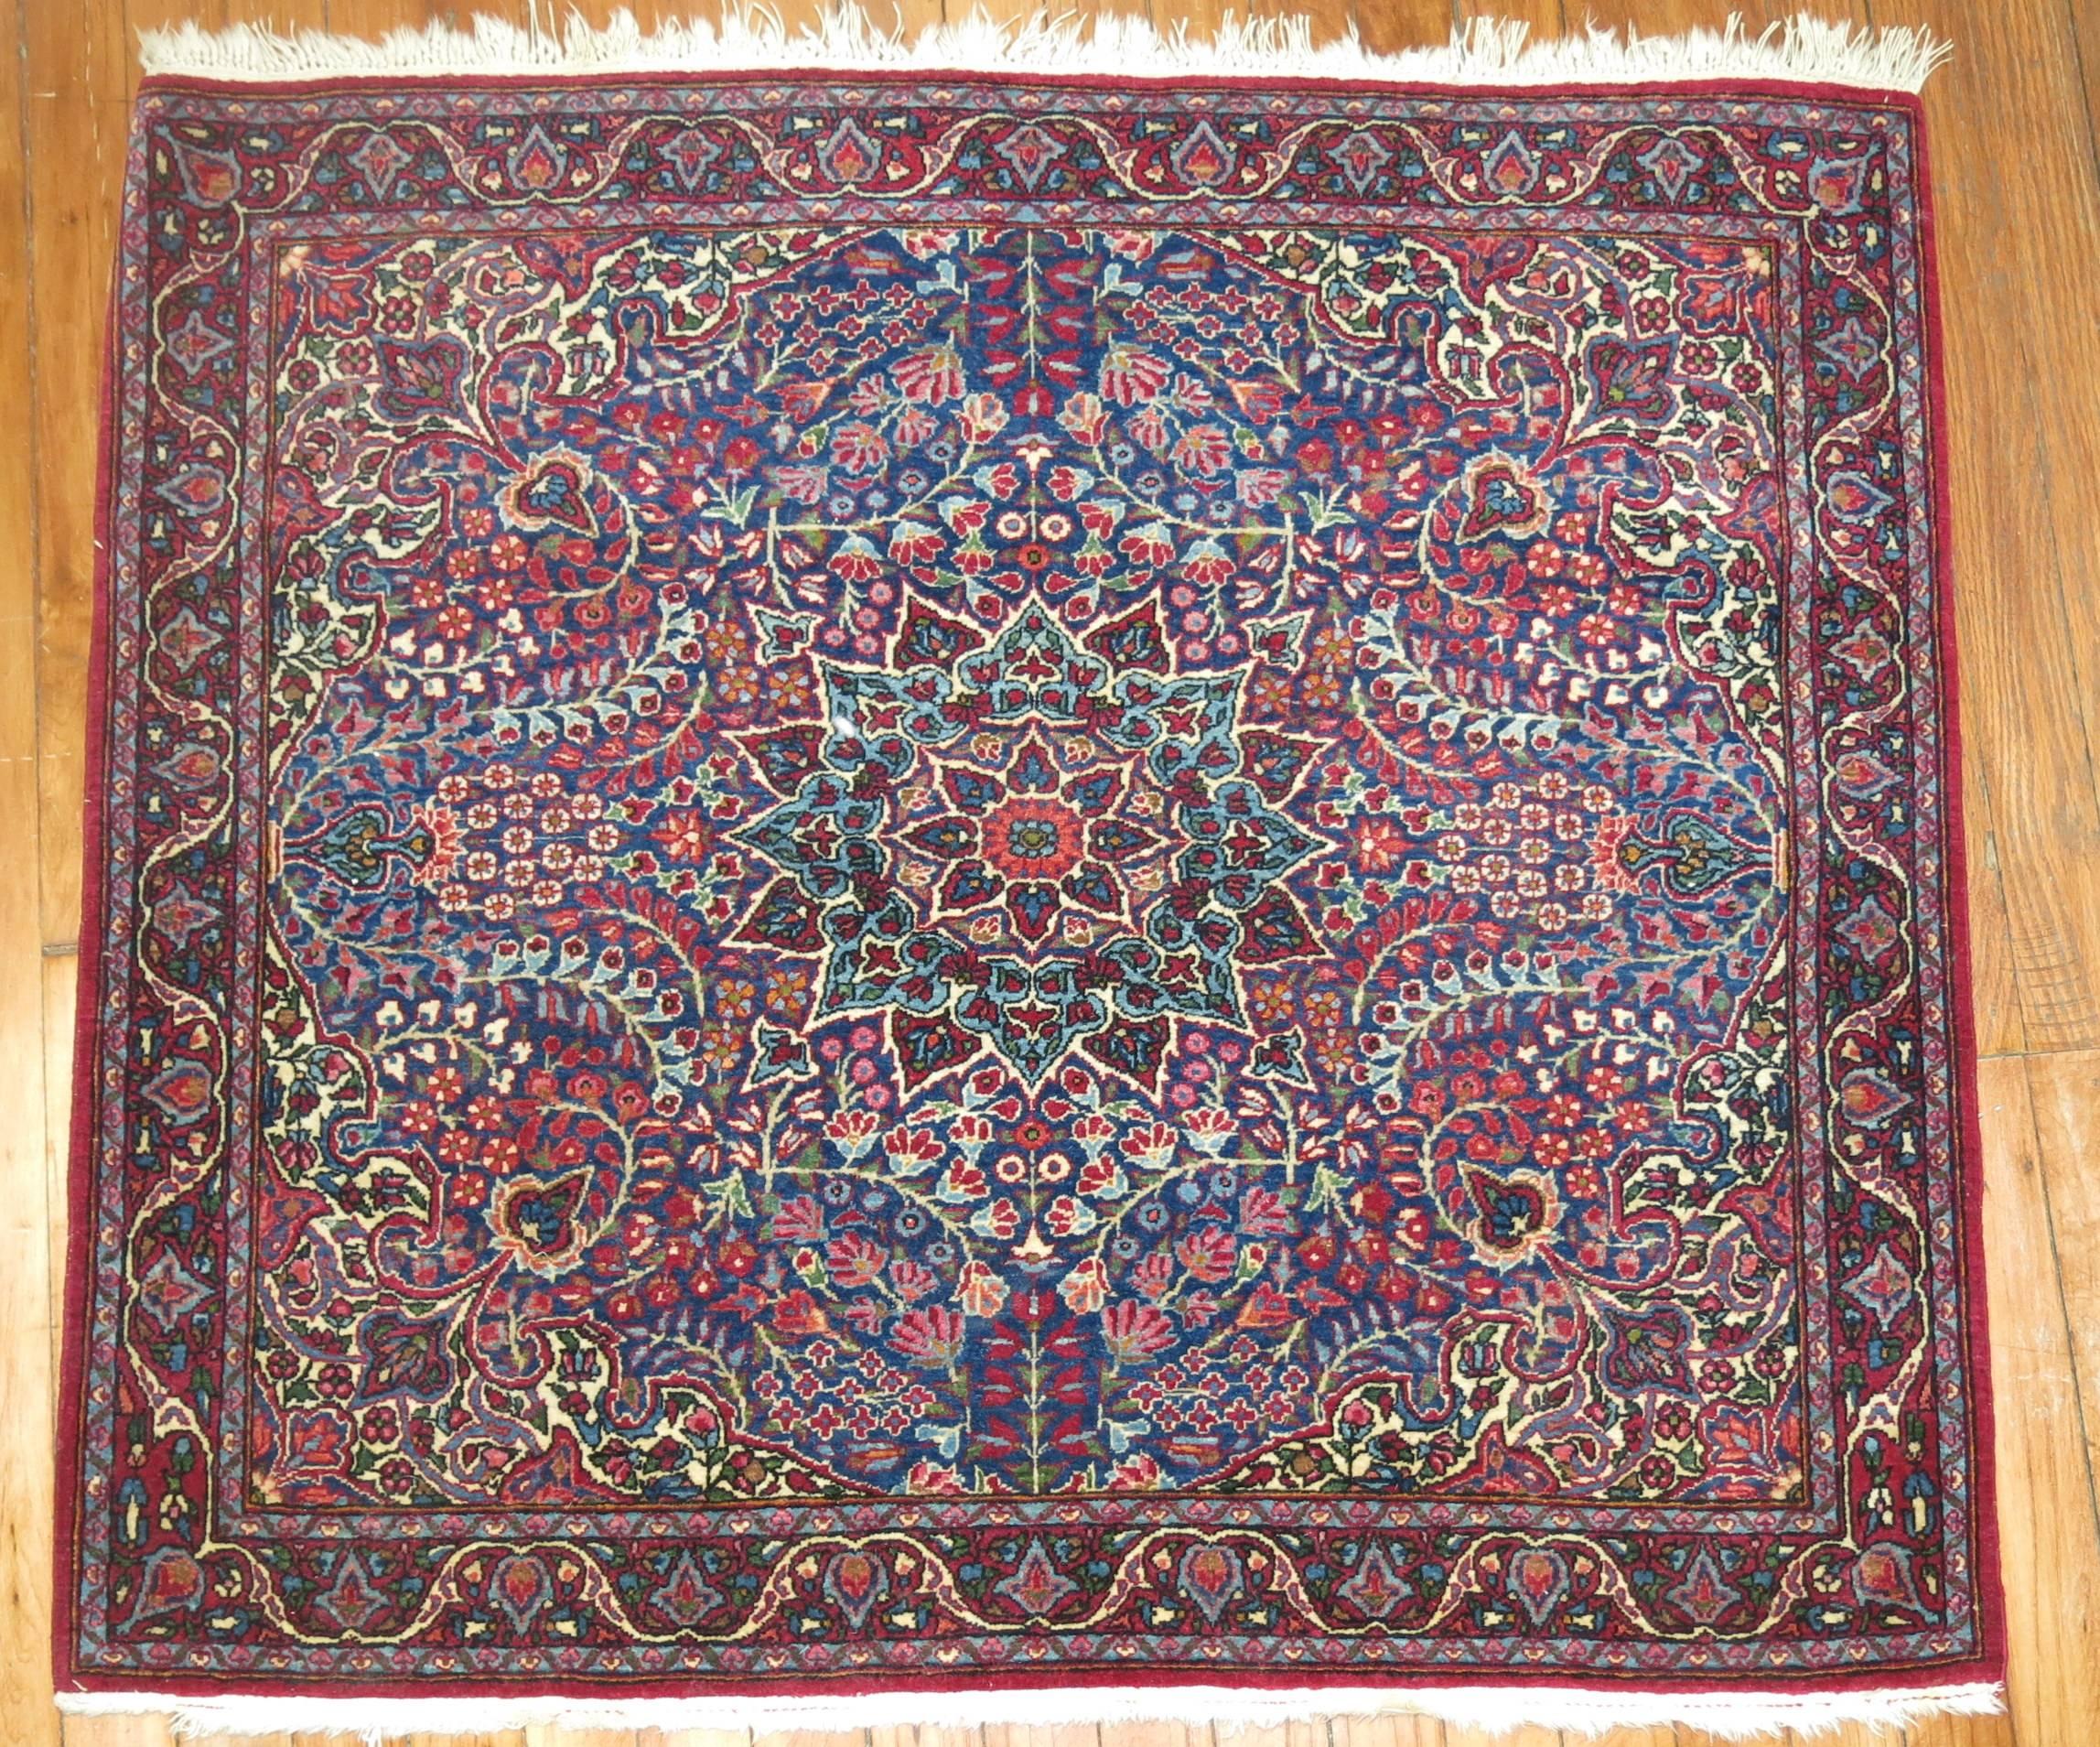 Connoisseur caliber Rare Size Persian Yazd rug.

Antique rugs from Iran are always referred to by the region where they were woven. Halfway between the cities of Isfahan and Kerman, Yazd became of the more infamous and classical Persian rugs and